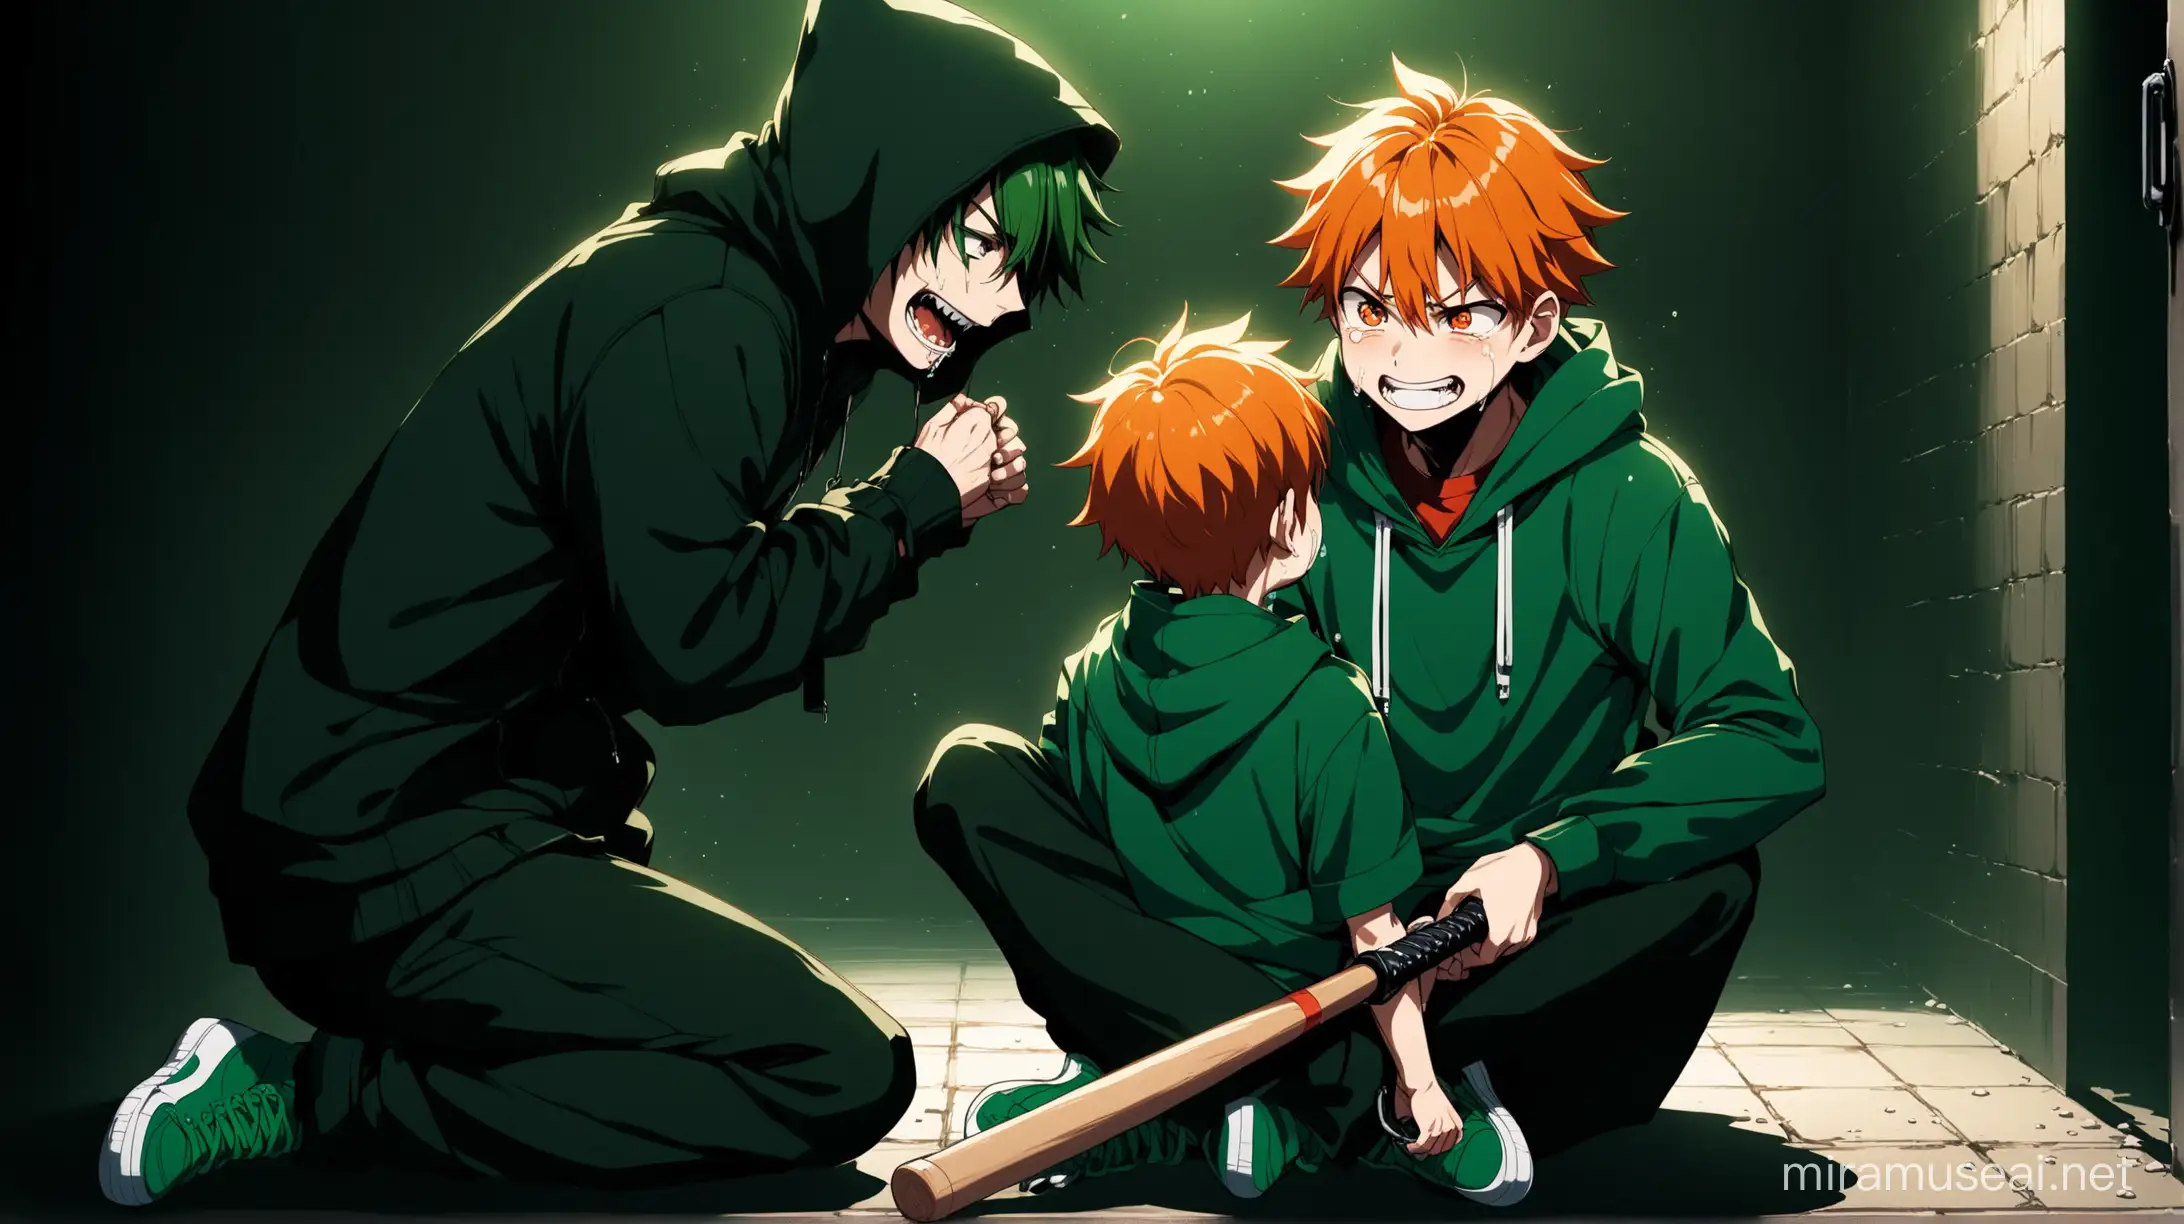 Anime Boy Trapped and Crying Confronted by Evil Criminal with Baseball Bat